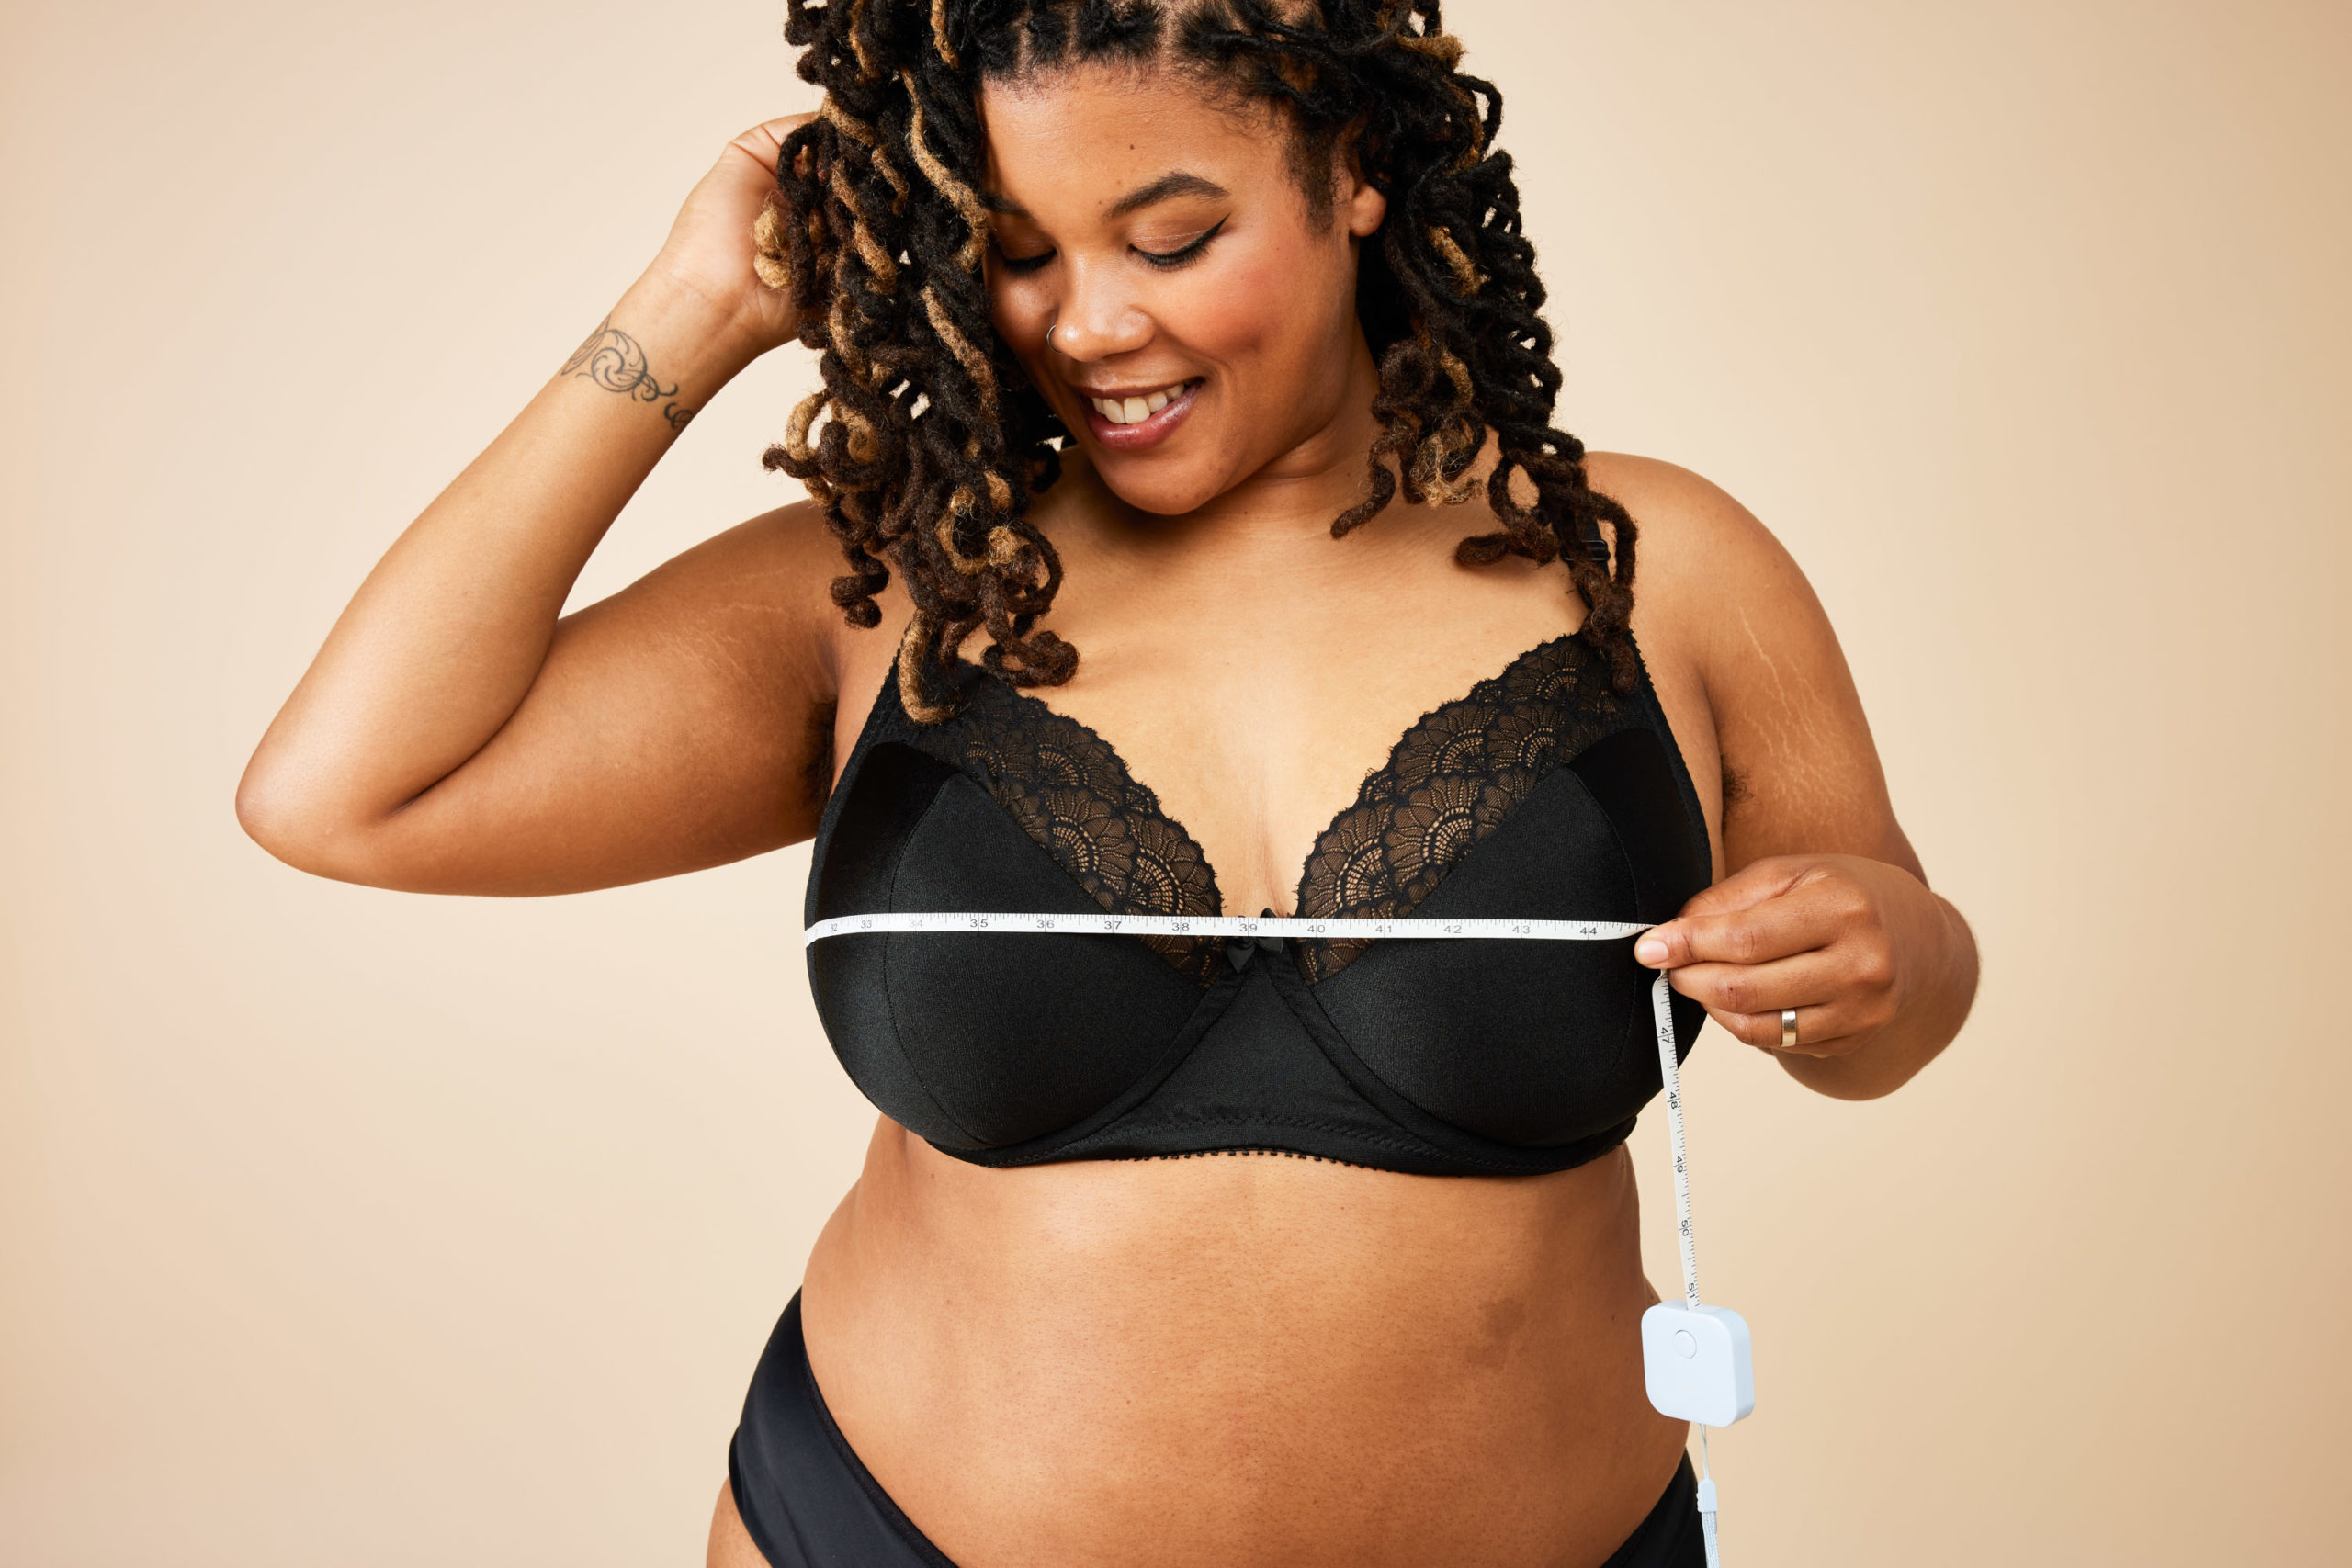 Full-Busted Or Not. How To Find The Perfect Fit Bra – Miriam Baker